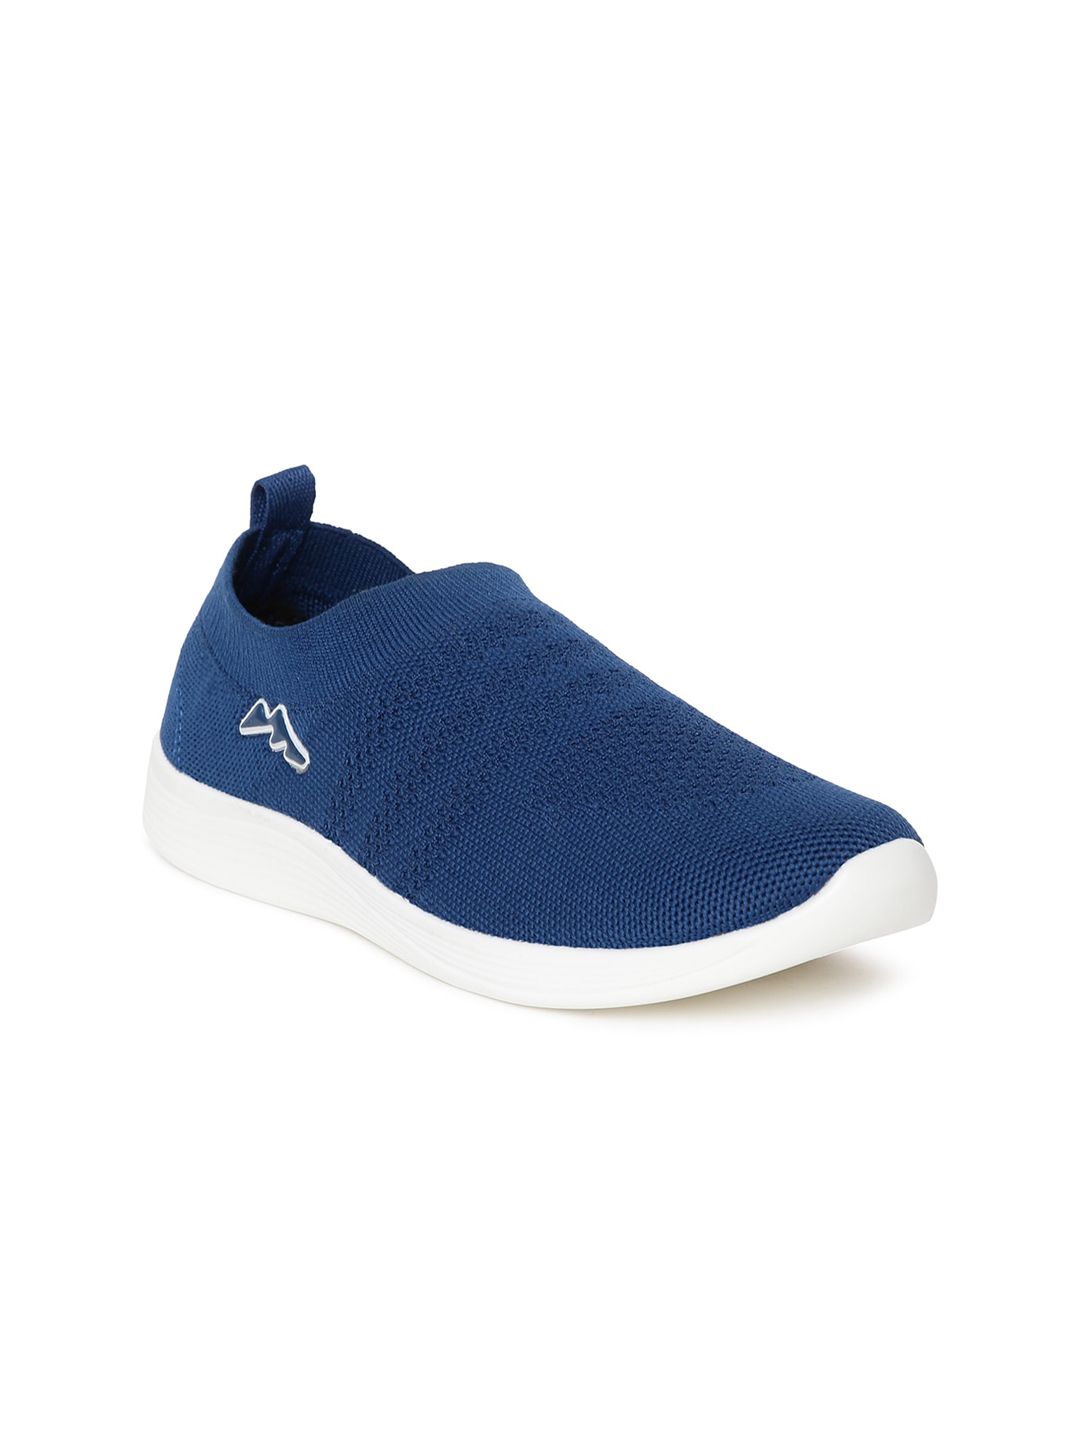 Paragon Women Woven Design Slip-On Sneakers Price in India